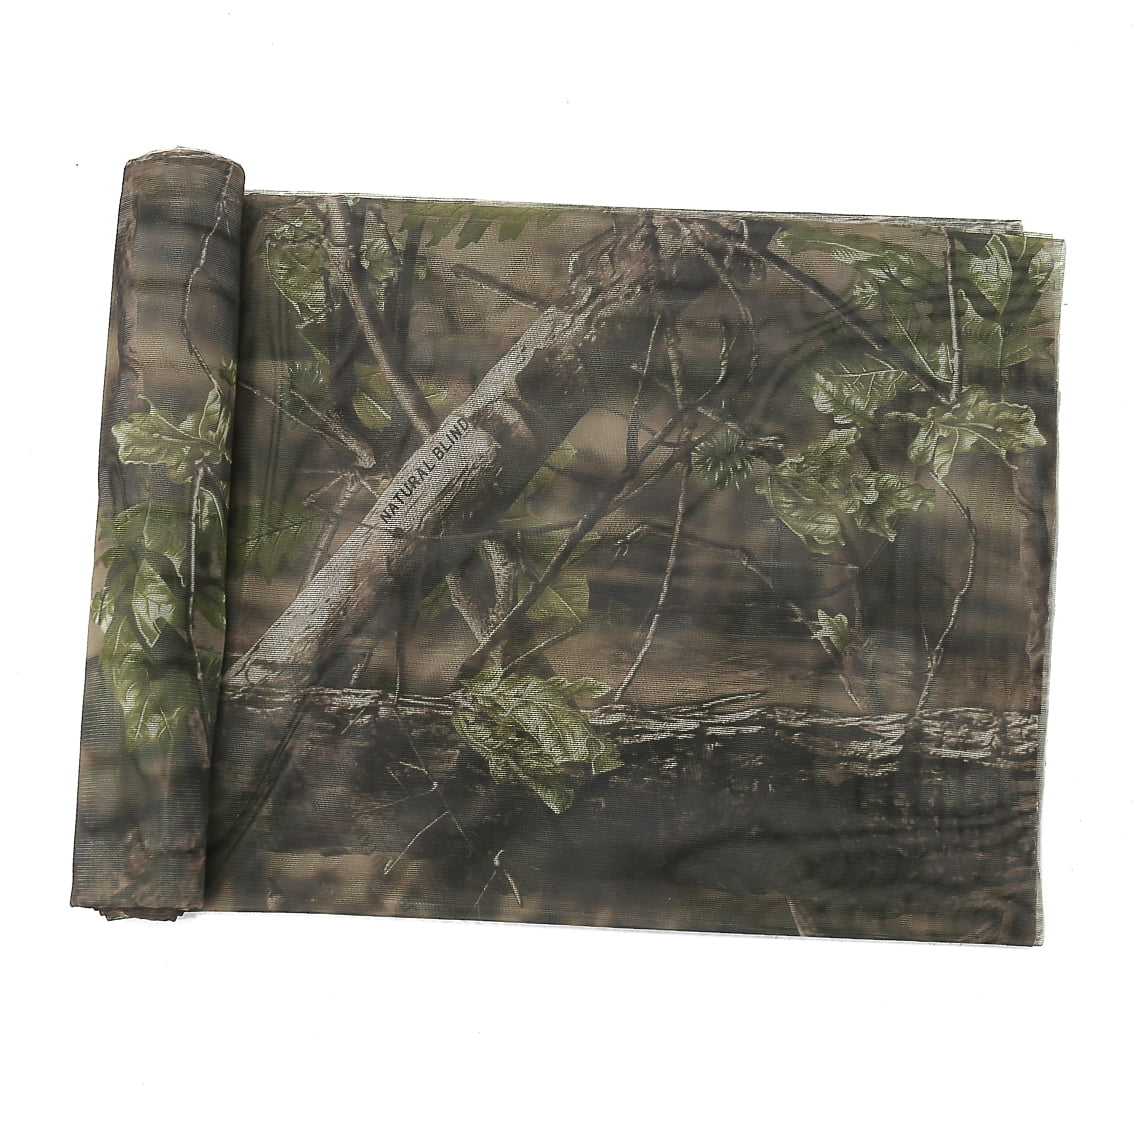 Knurre lokal forfængelighed AUSCAMOTEK Woodland Camo Mesh Netting Camouflage Netting for Hunting Blinds  Window Camping Clear View Camo Hunting Hide Net, Green 5 ft x 12 ft (appro)  - Walmart.com